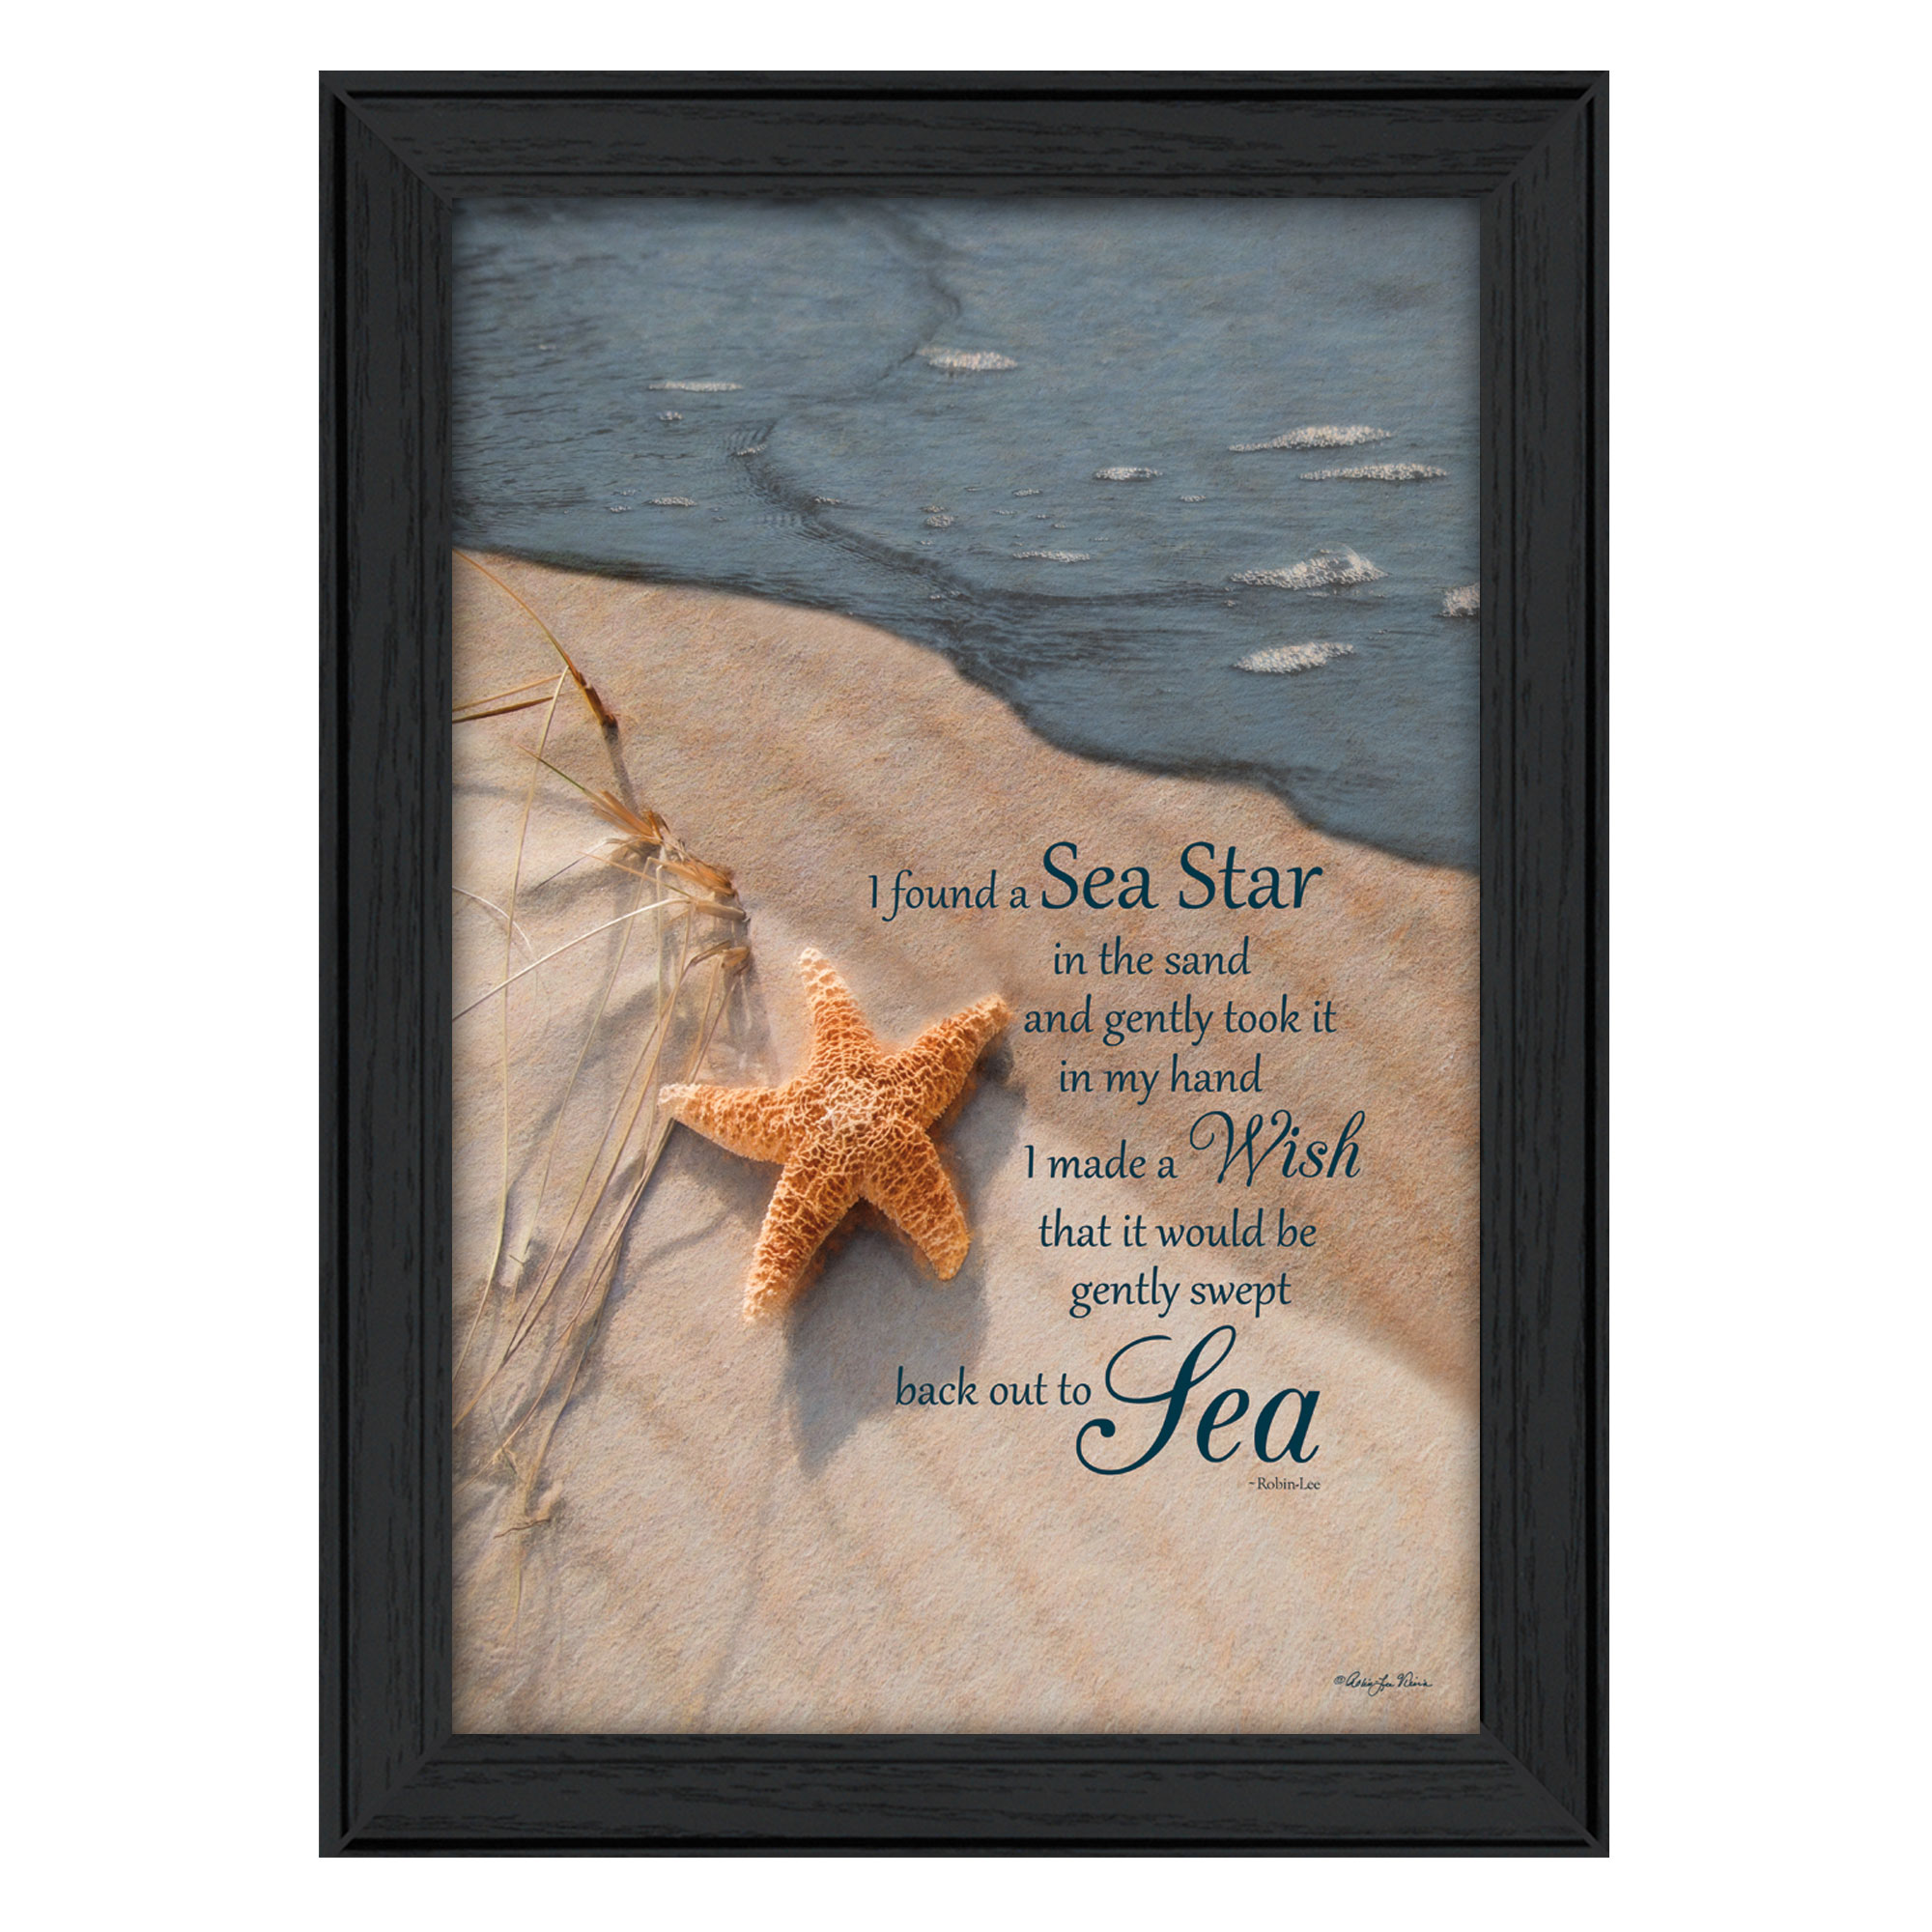 "The Wish" By Robin-Lee Vieira, Printed Wall Art, Ready To Hang Framed Poster, Black Frame